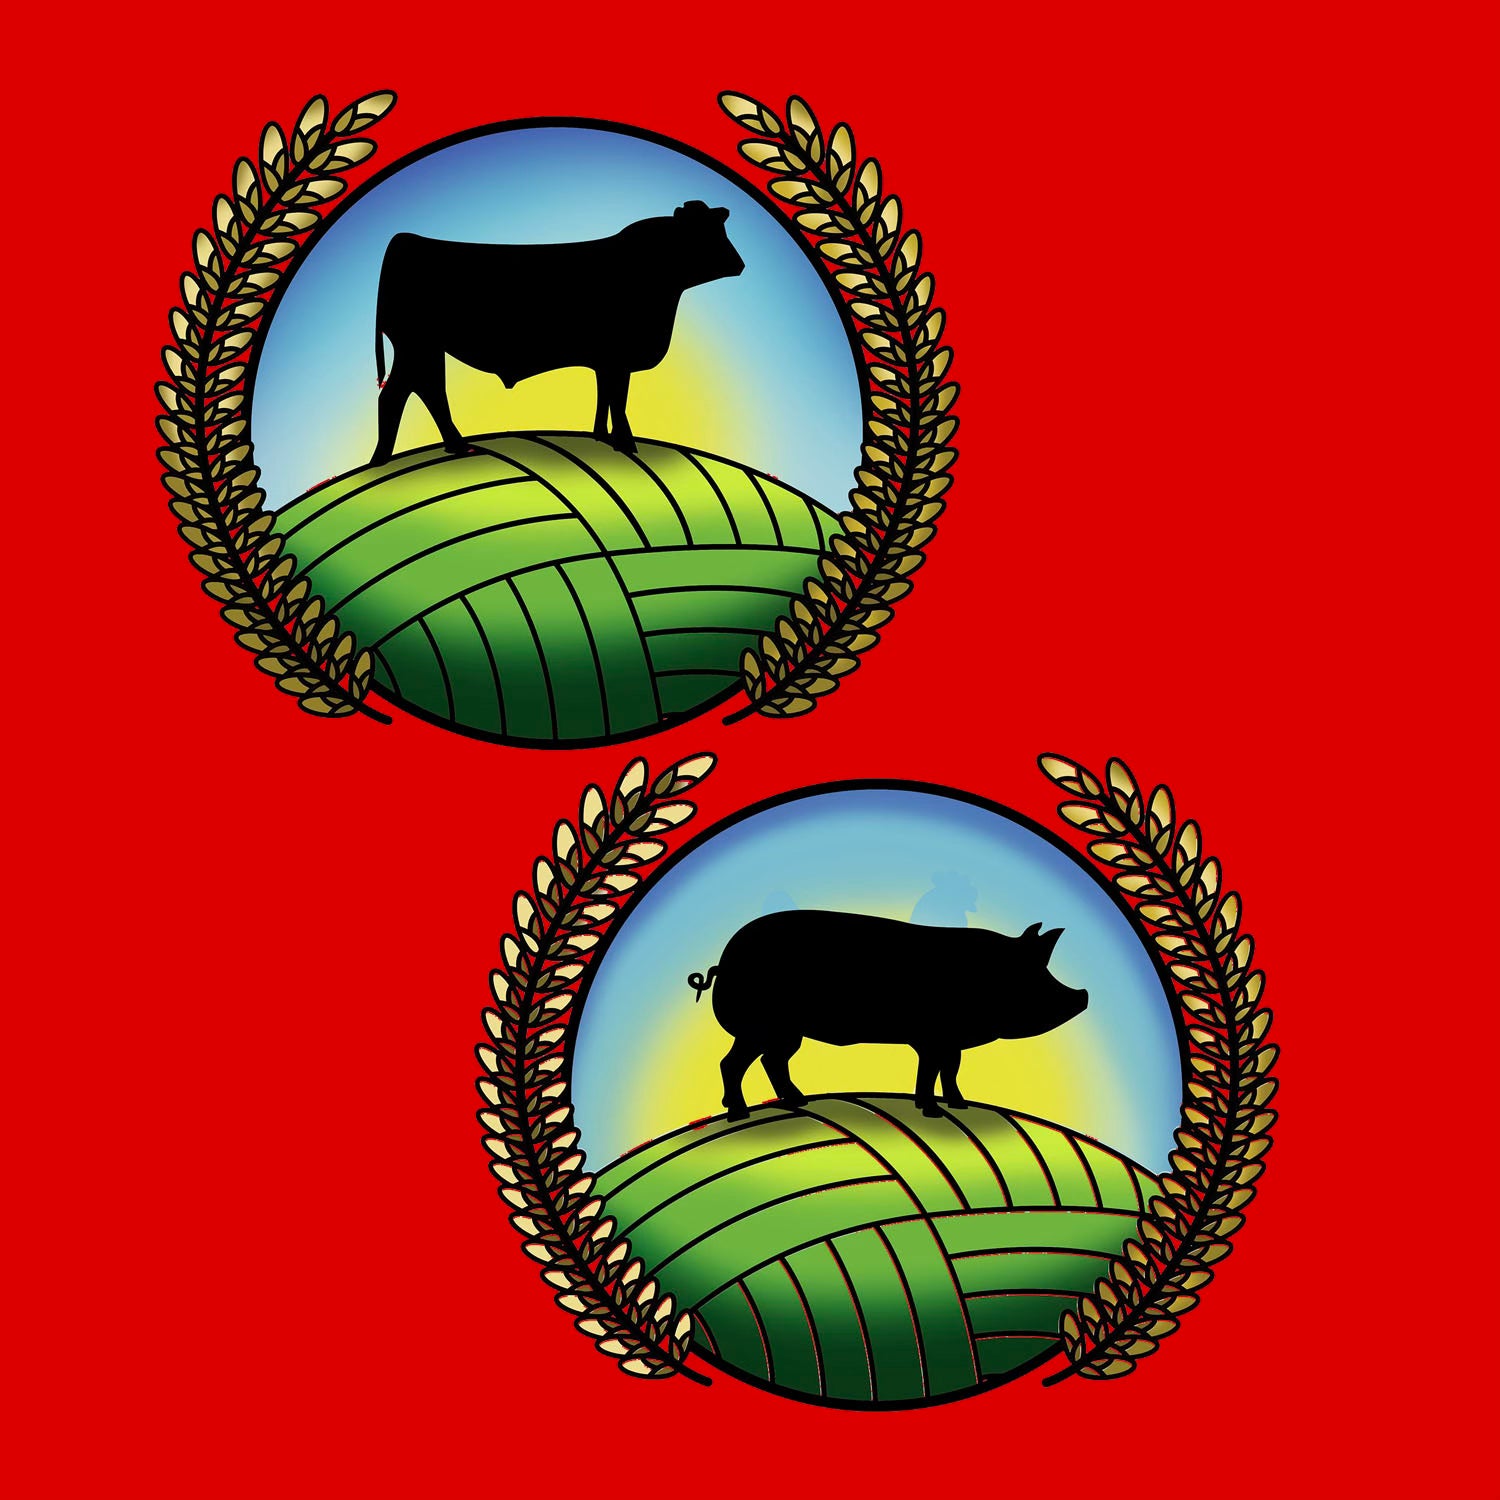 Beef and pork logos for our farm store tab